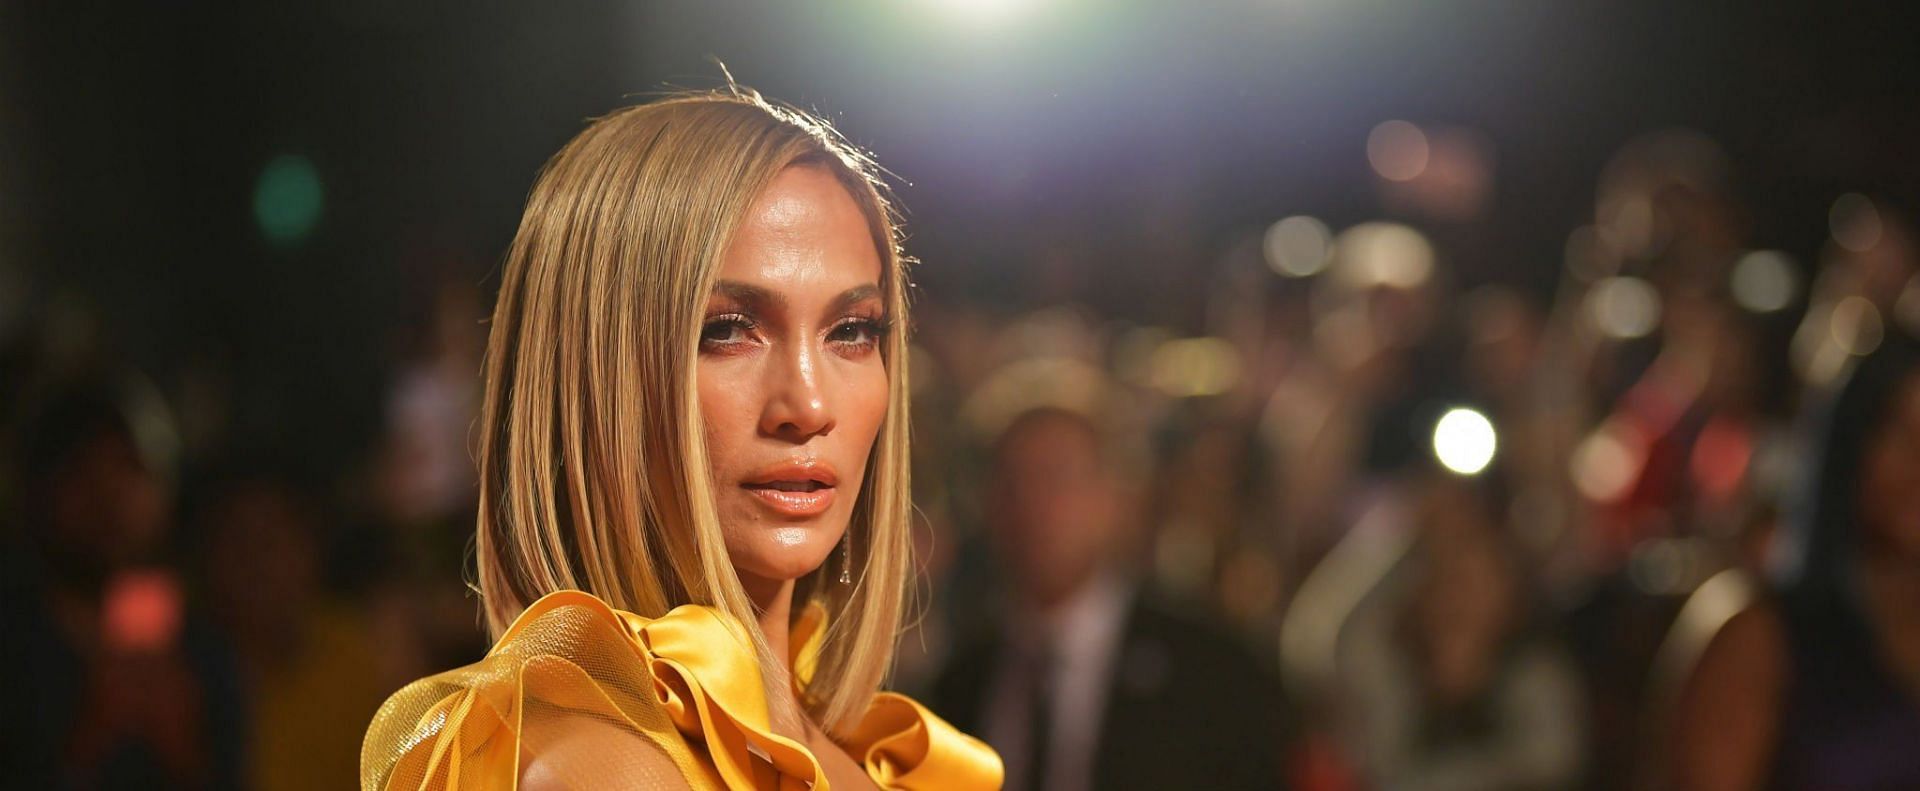 Jennifer Lopez has been engaged four times and got married thrice in her life (Image via Amy Sussman/WireImage)